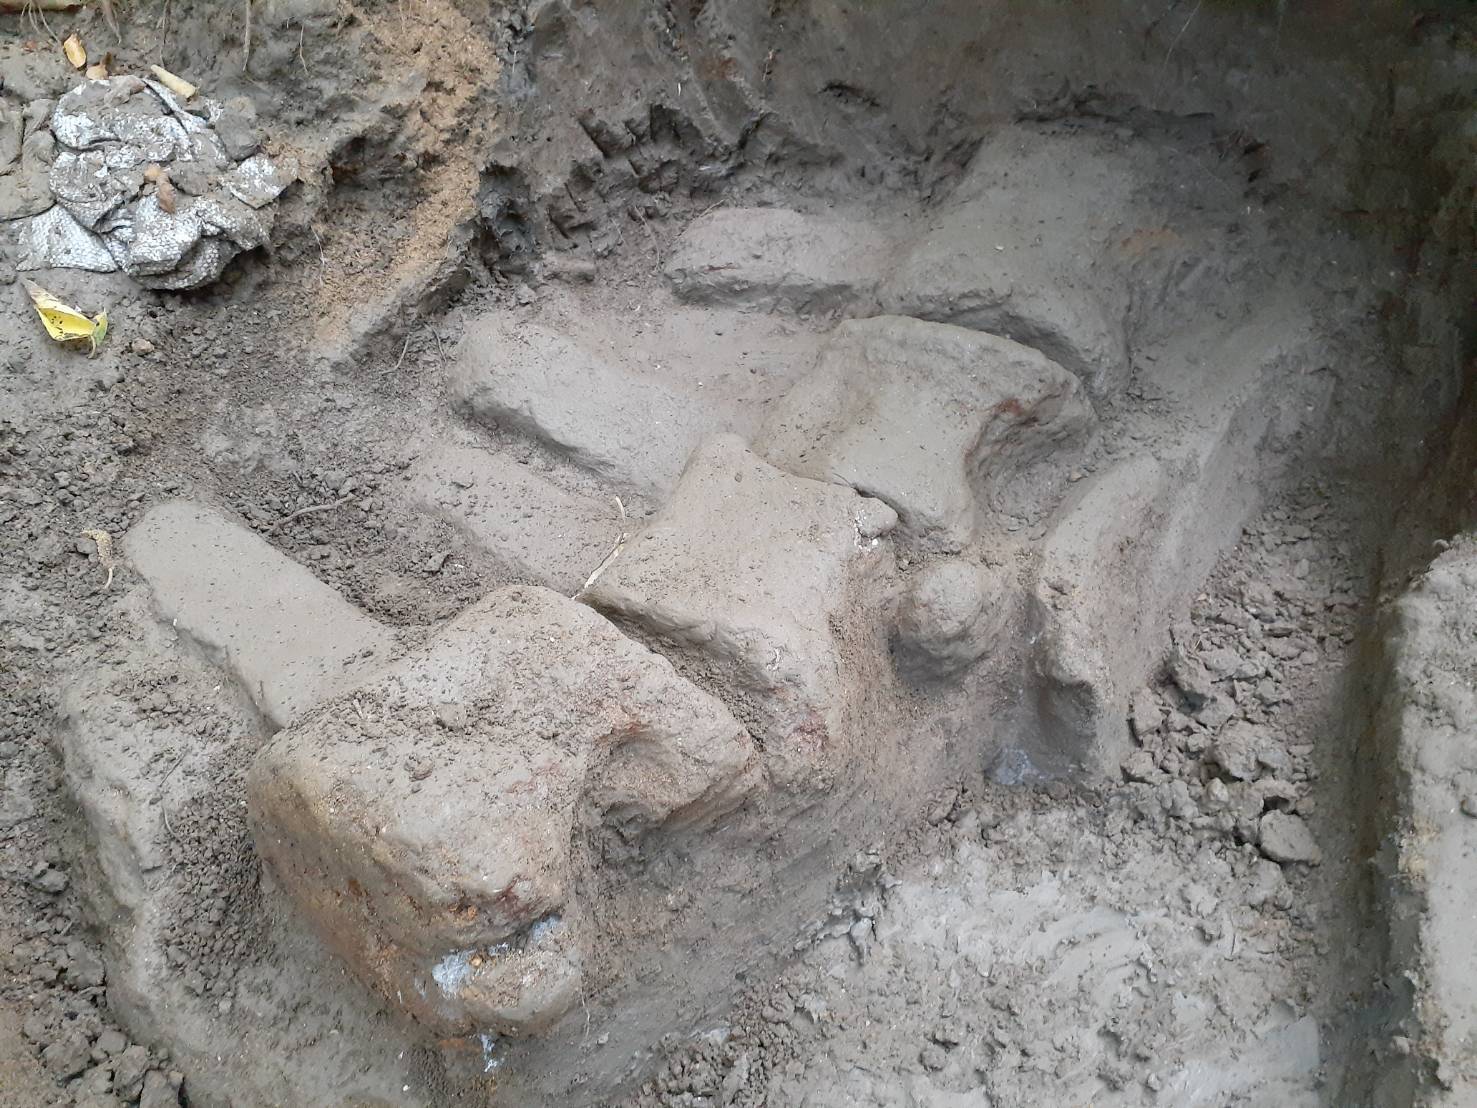 Whale bones found by the excavation team in Tougou, Hengchun, Pingtung